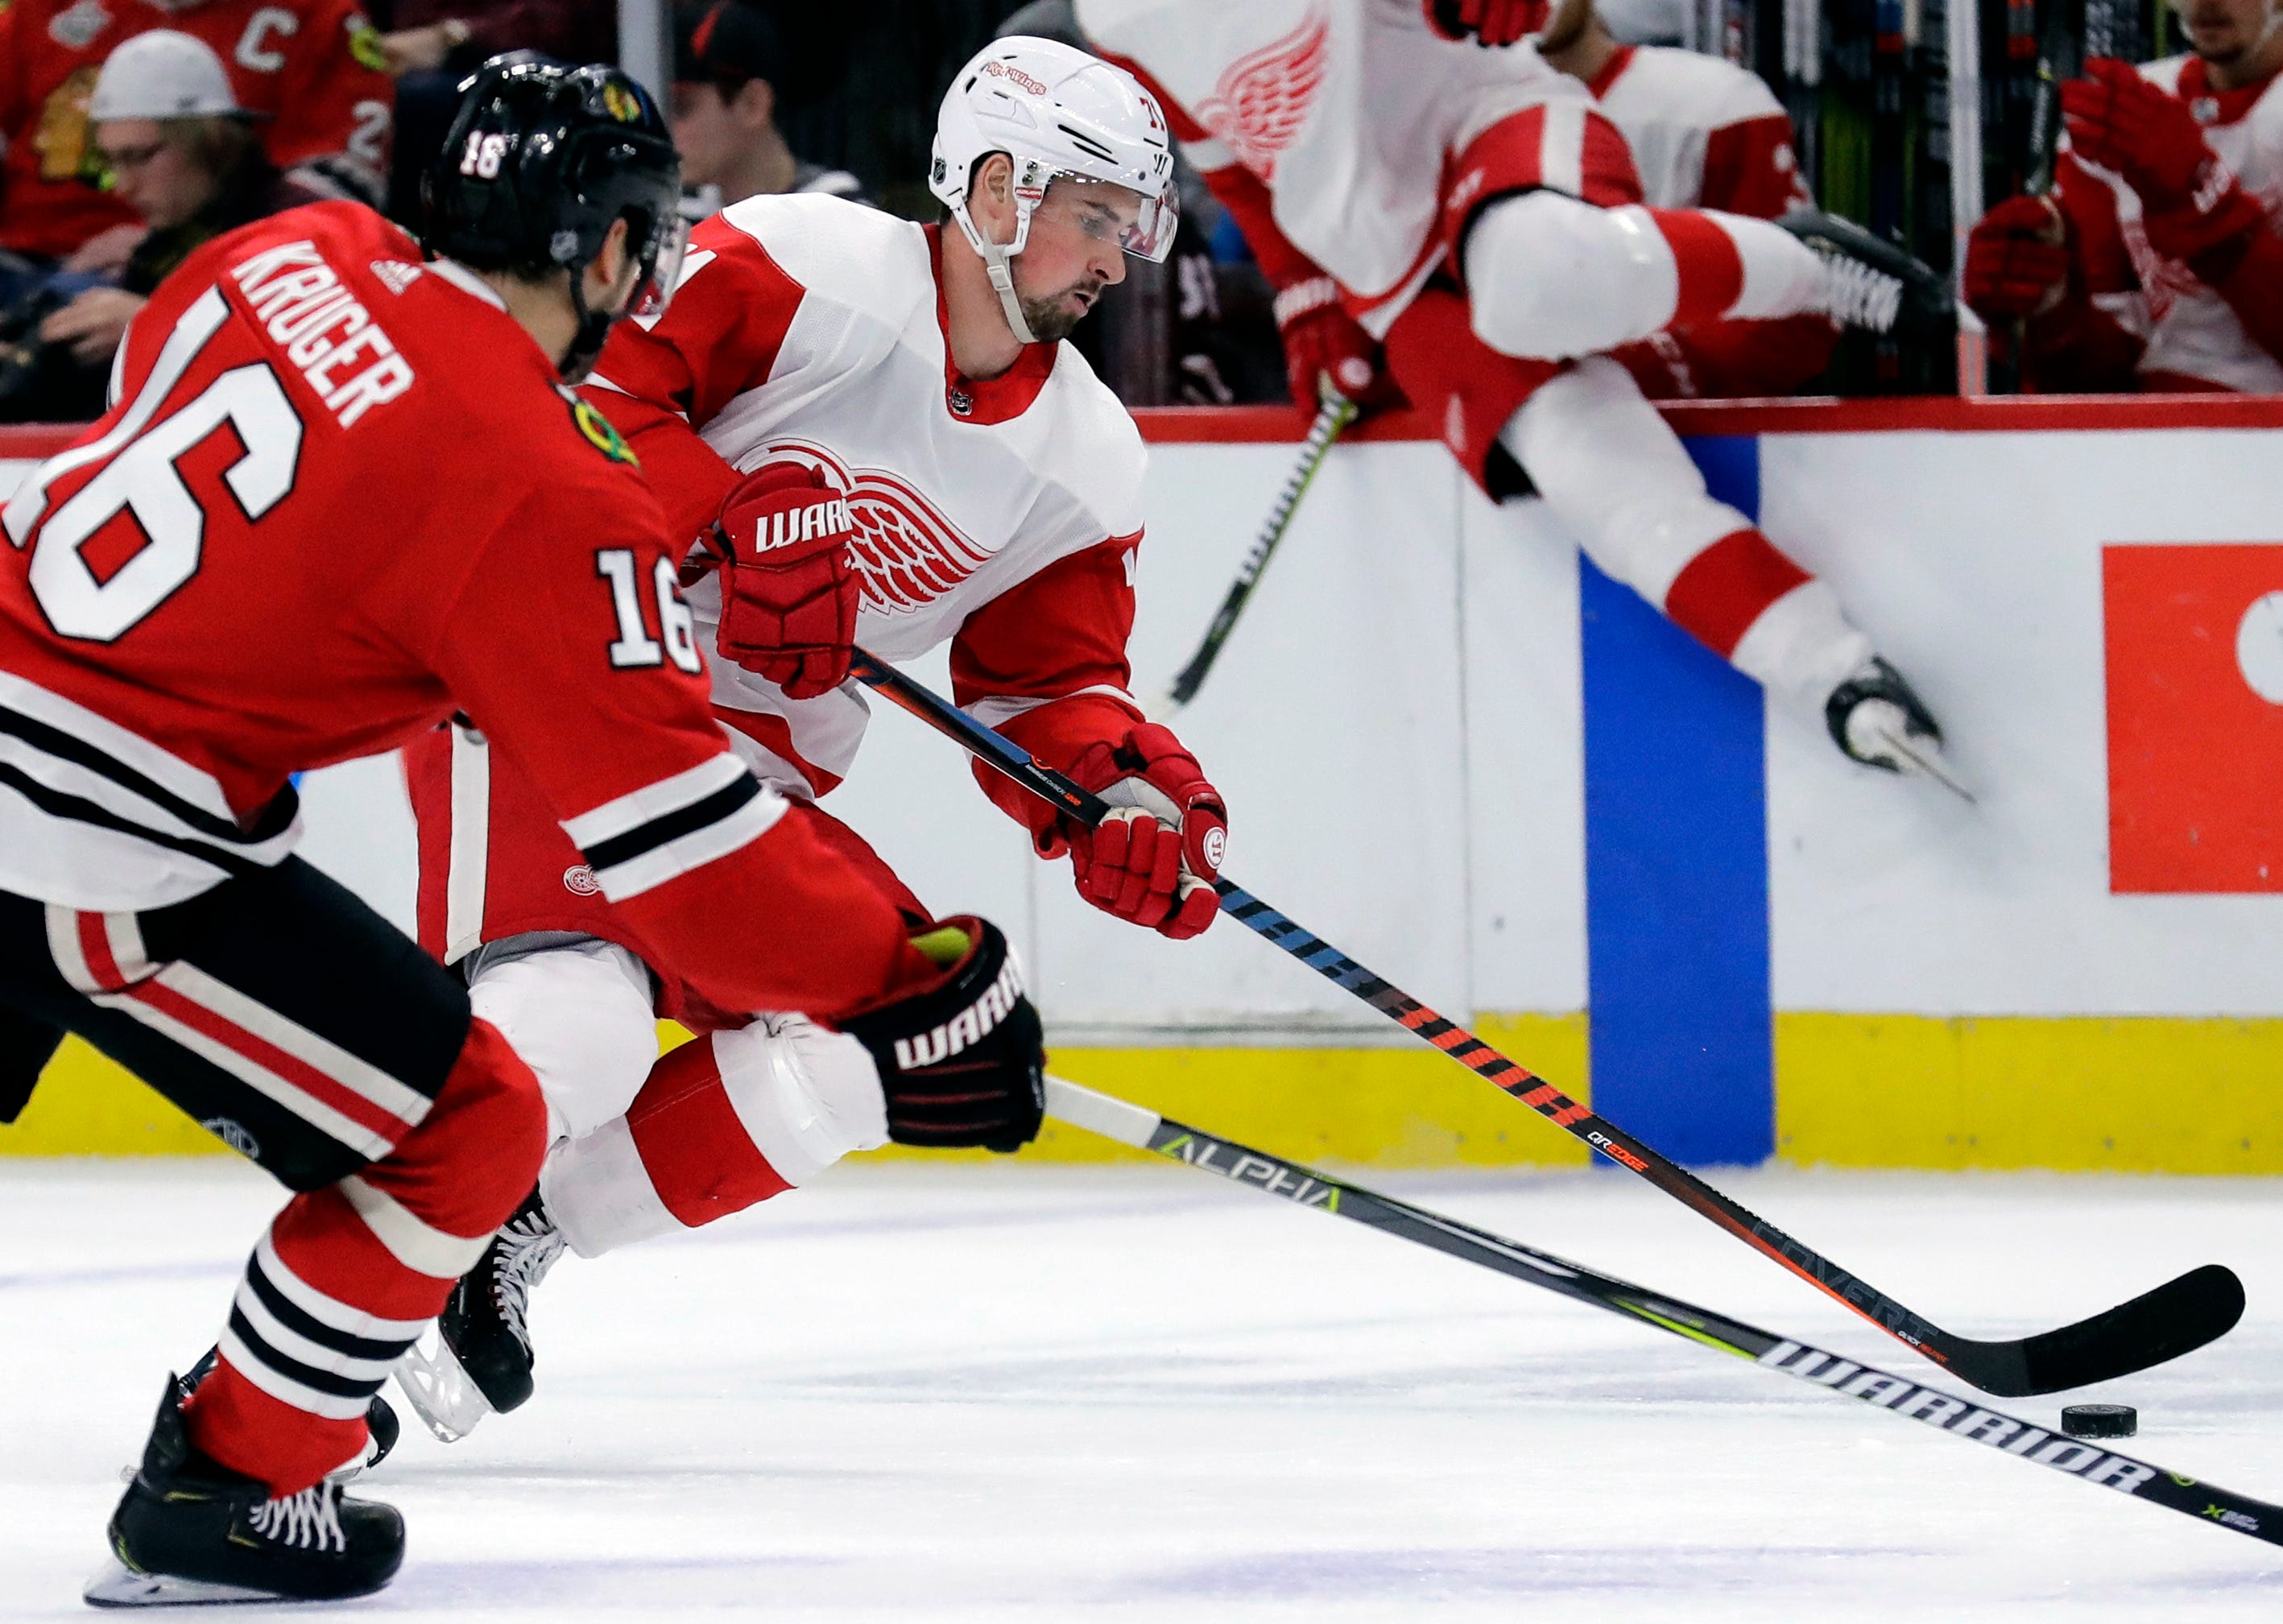 Detroit Red Wings center Dylan Larkin, front right, controls the puck against Chicago Blackhawks center Marcus Kruger, left, during the first period.